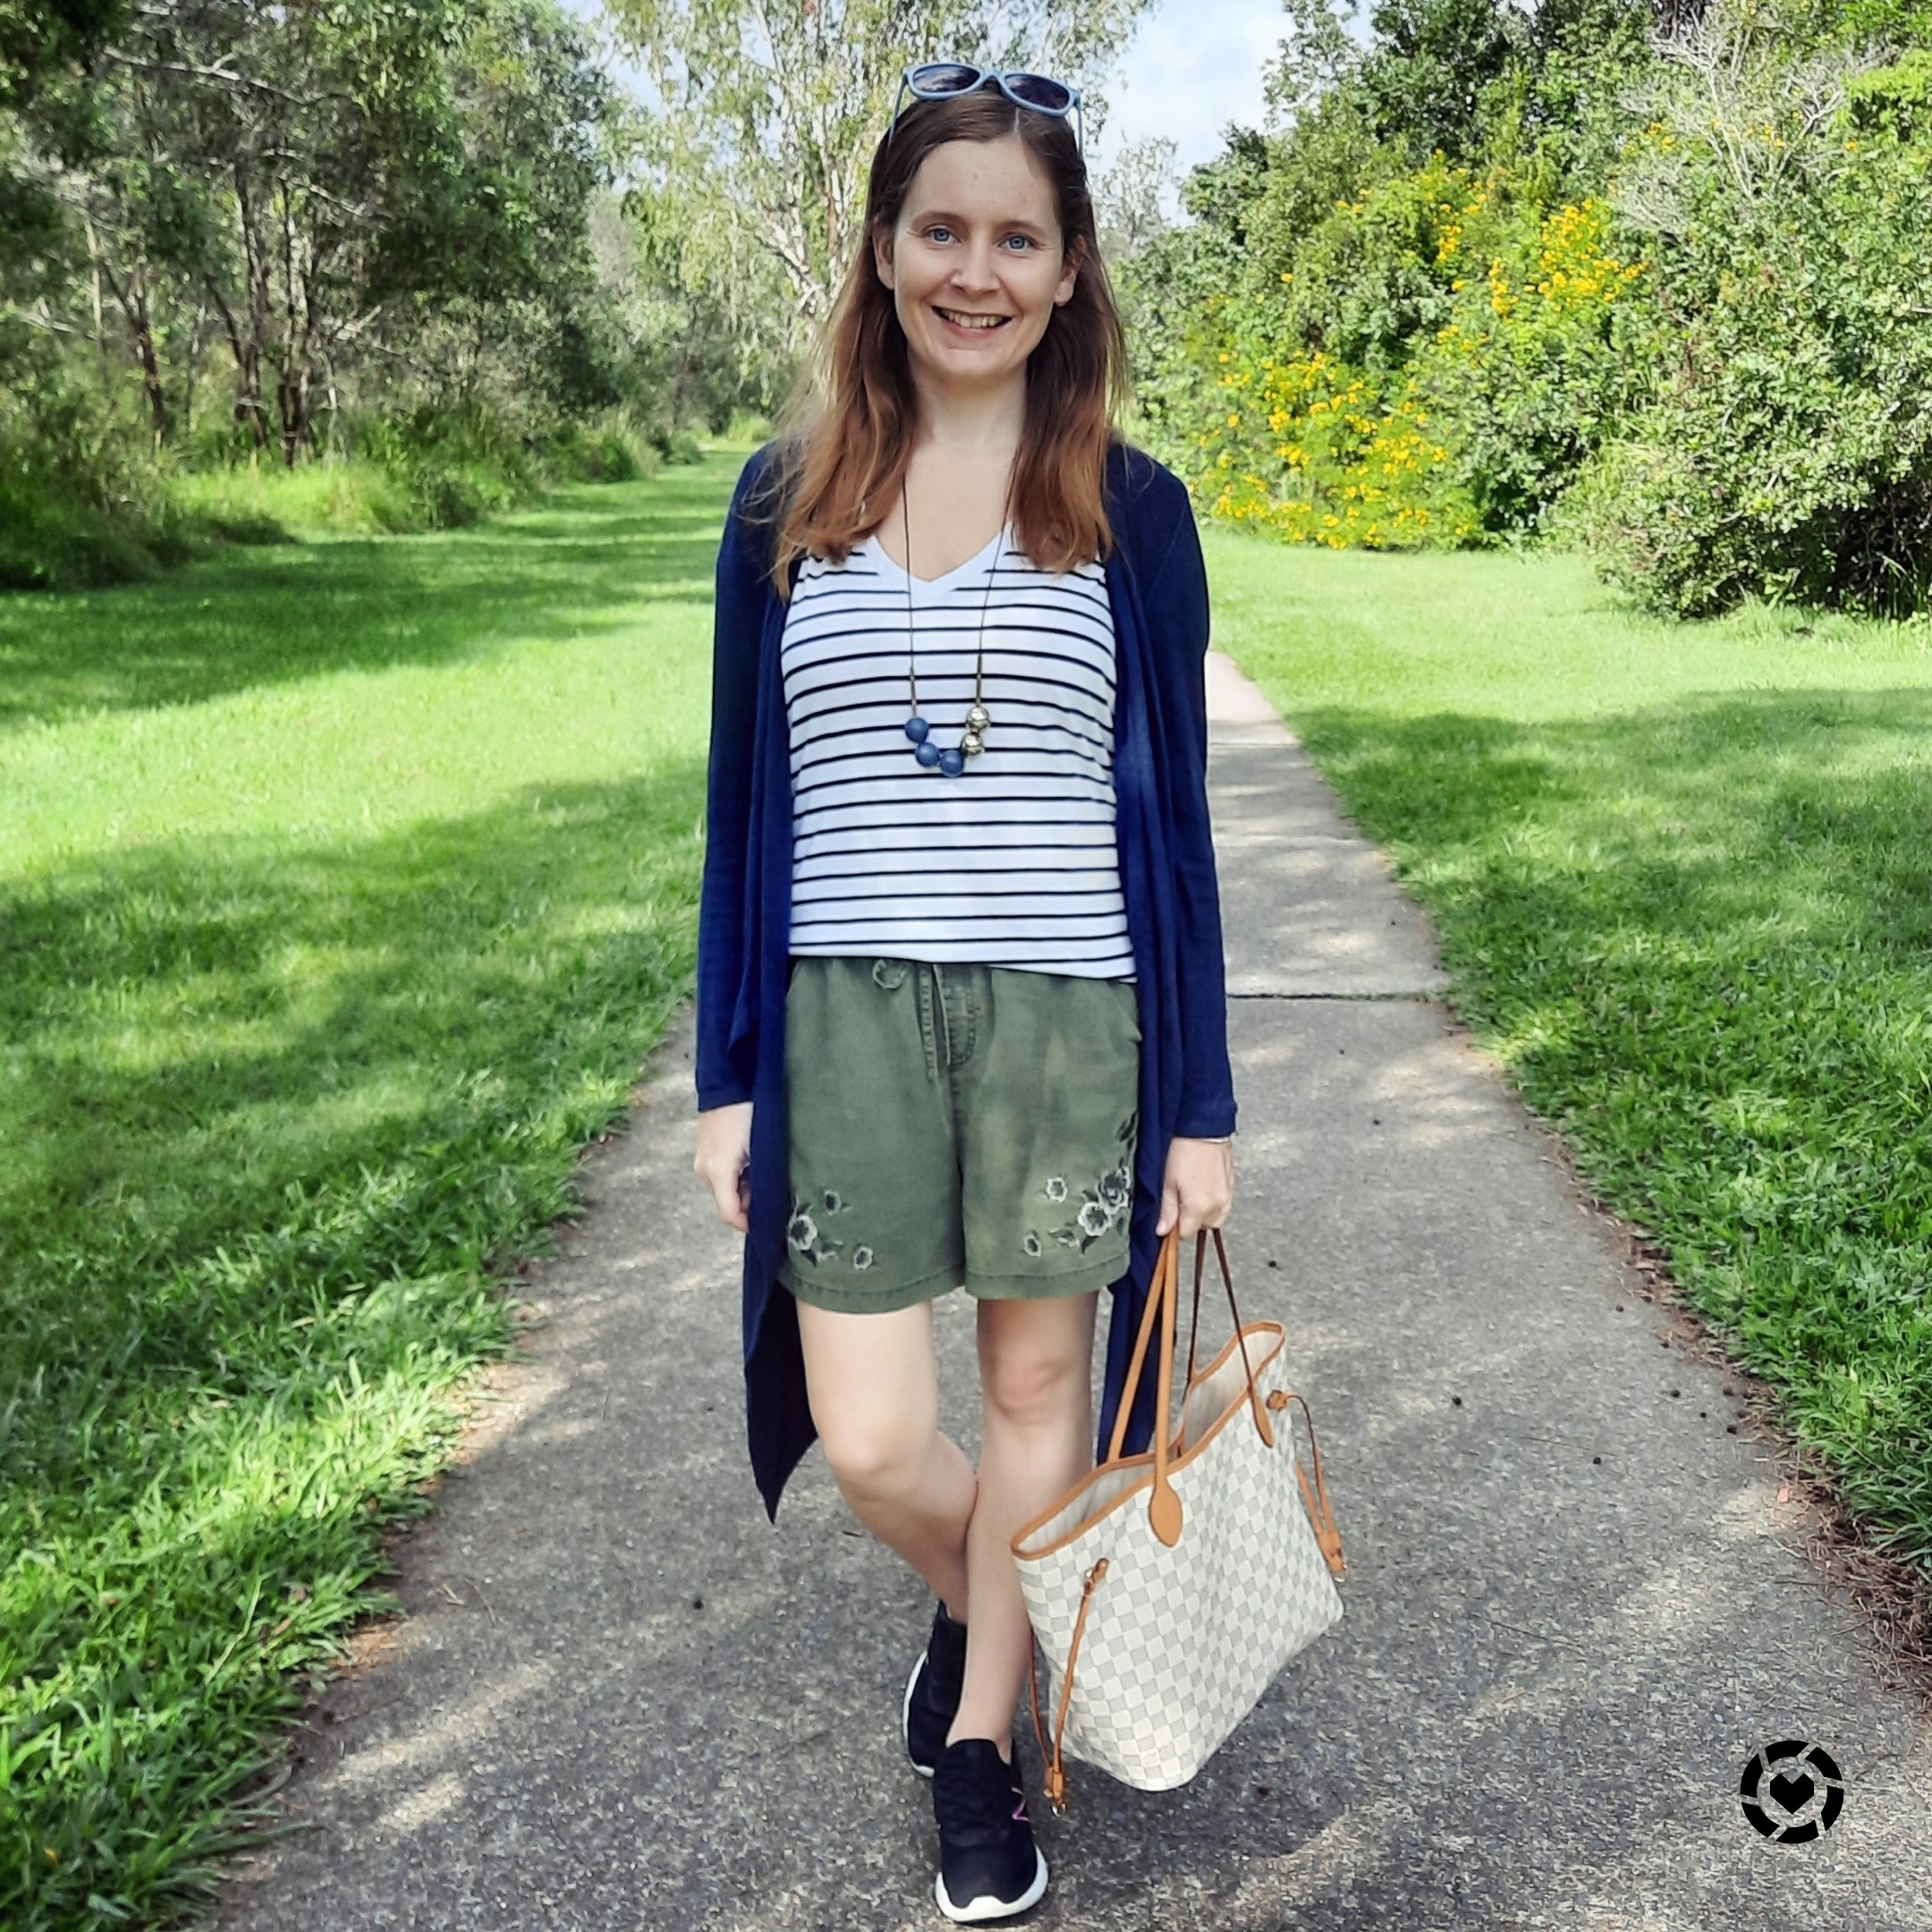 Away From Blue  Aussie Mum Style, Away From The Blue Jeans Rut: Denim  Shorts, Slouchy Tees, Printed Scarves and Louis Vuitton Neverfull Tote